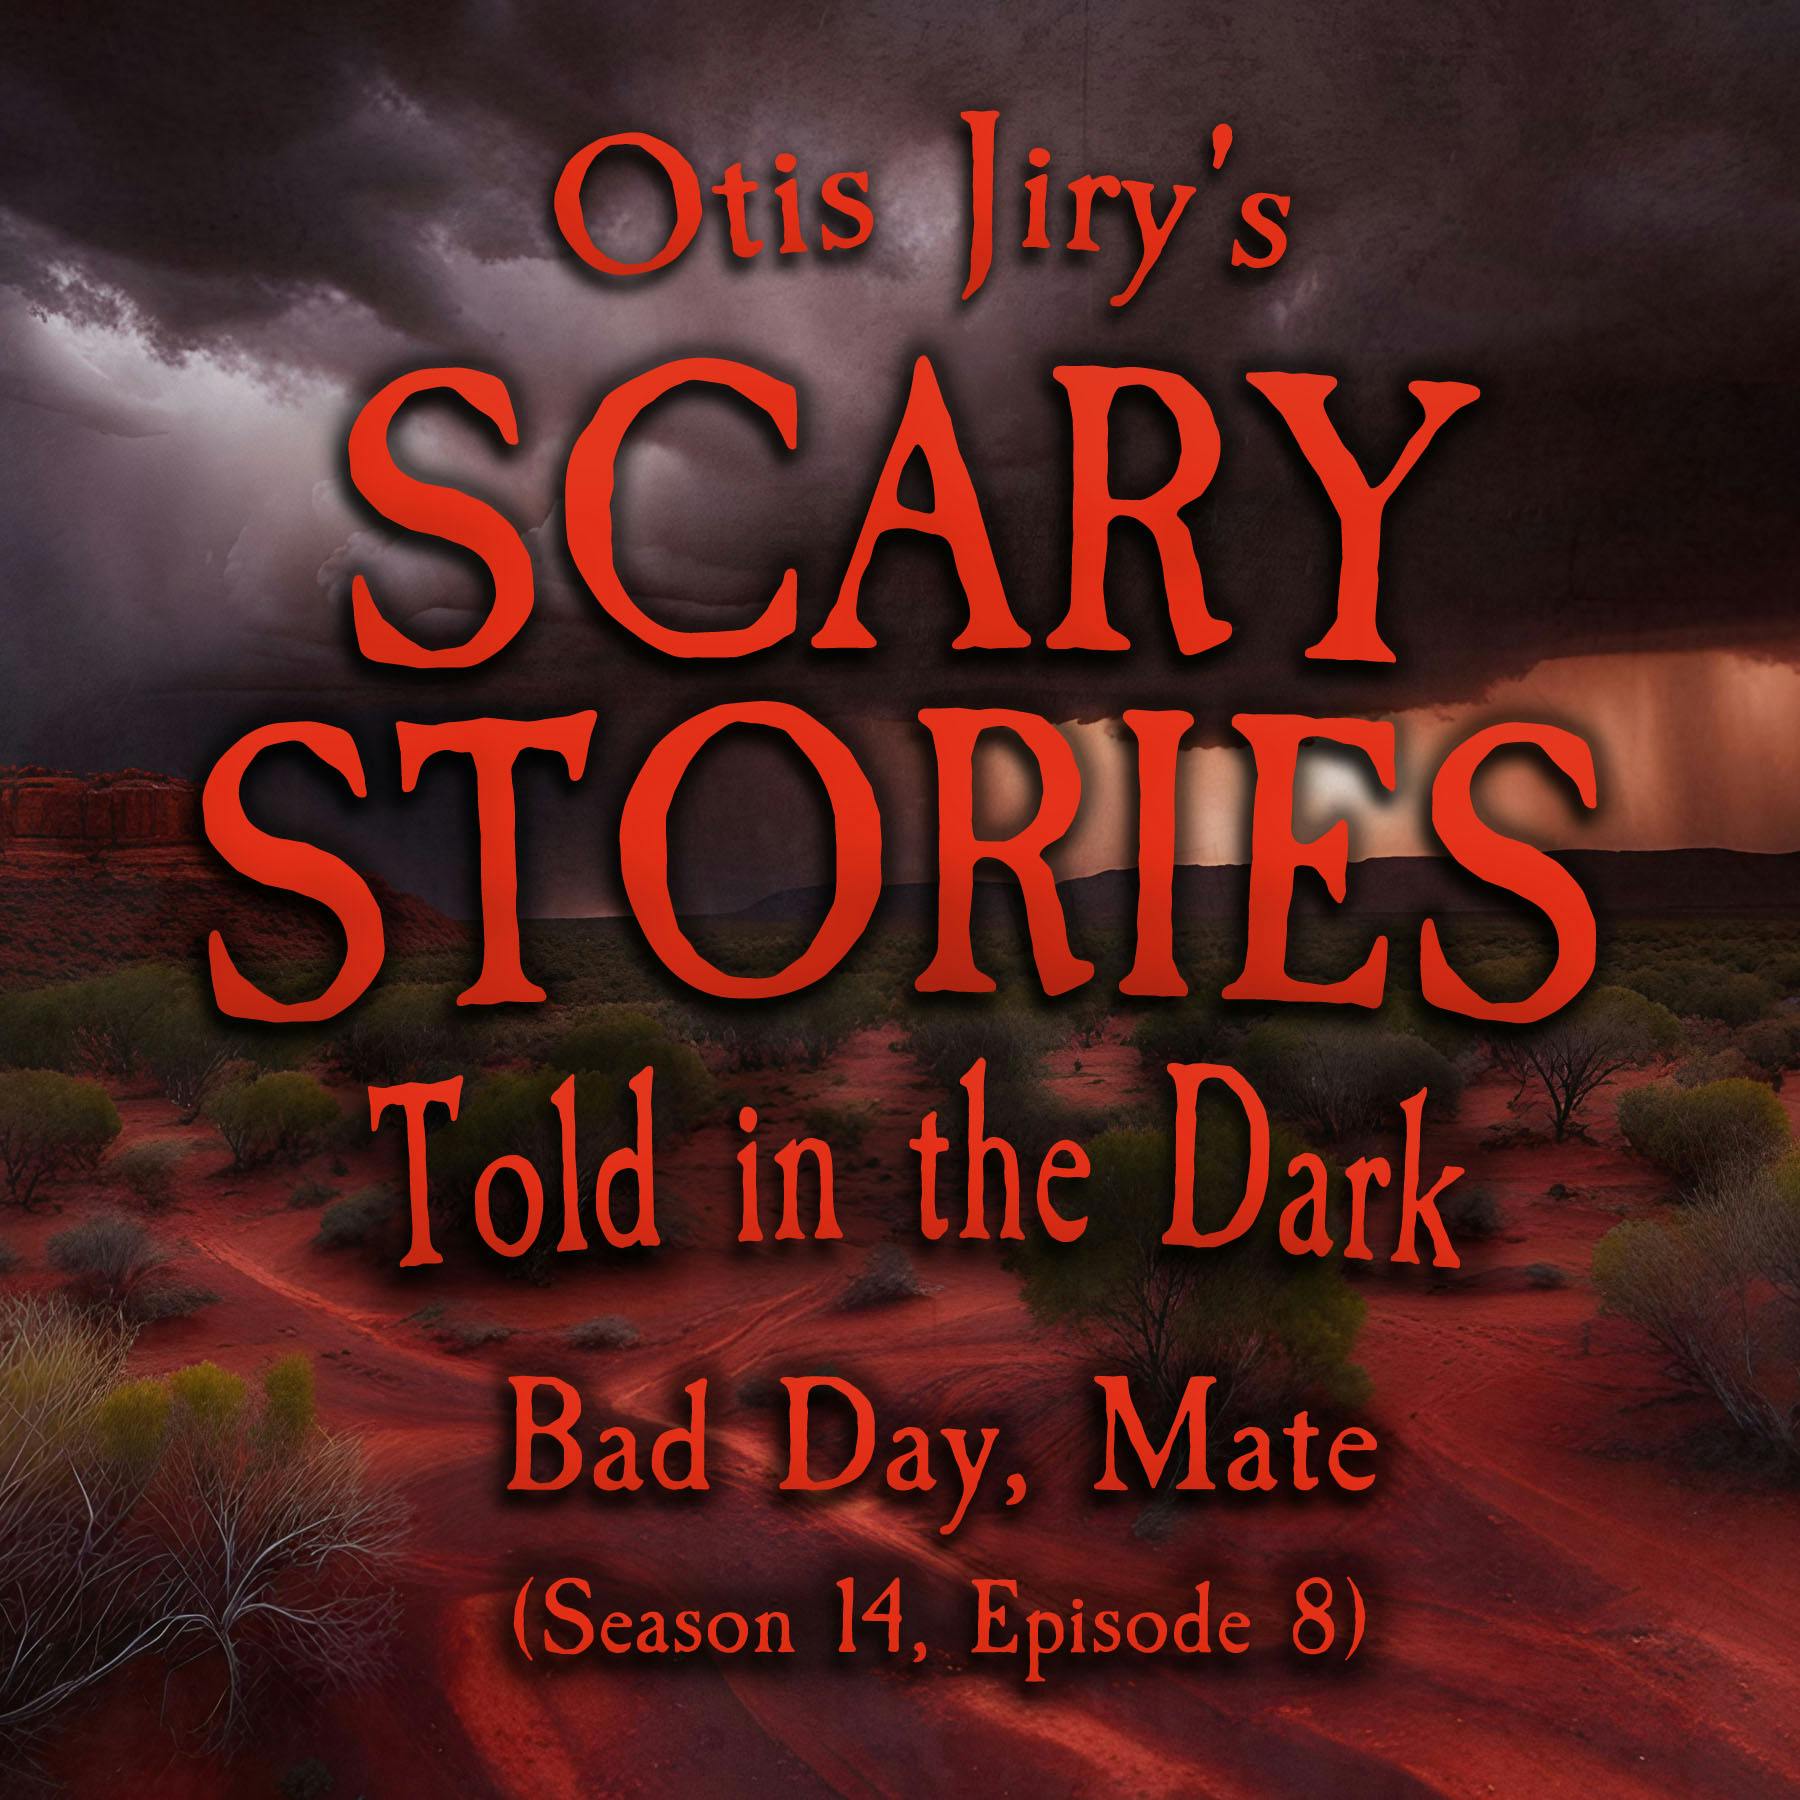 S14E08 - ”Bad Day, Mate” – Scary Stories Told in the Dark